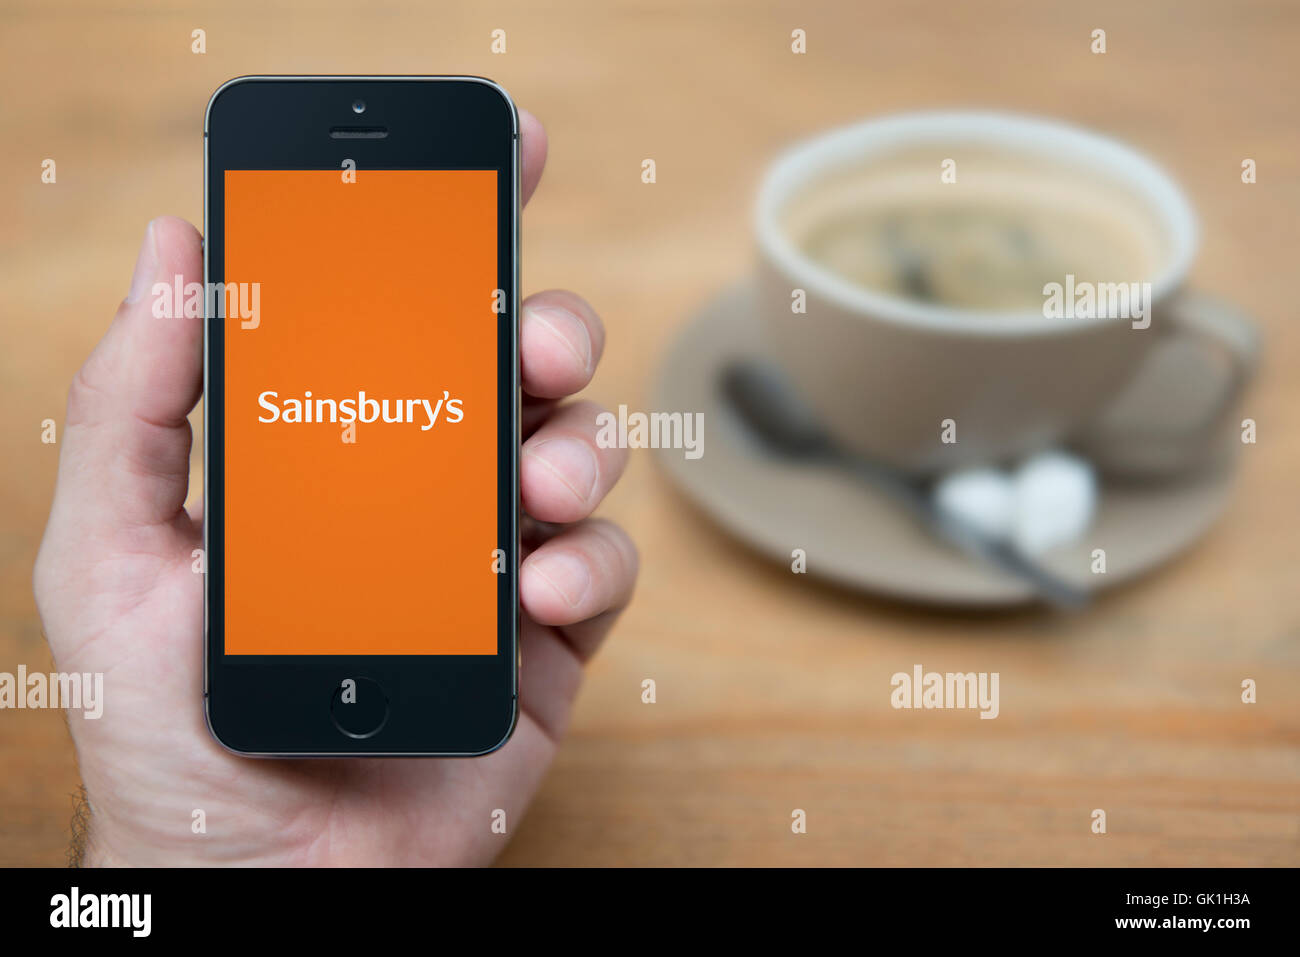 A man looks at his iPhone which displays the Sainsbury's logo, while sat with a cup of coffee (Editorial use only). Stock Photo